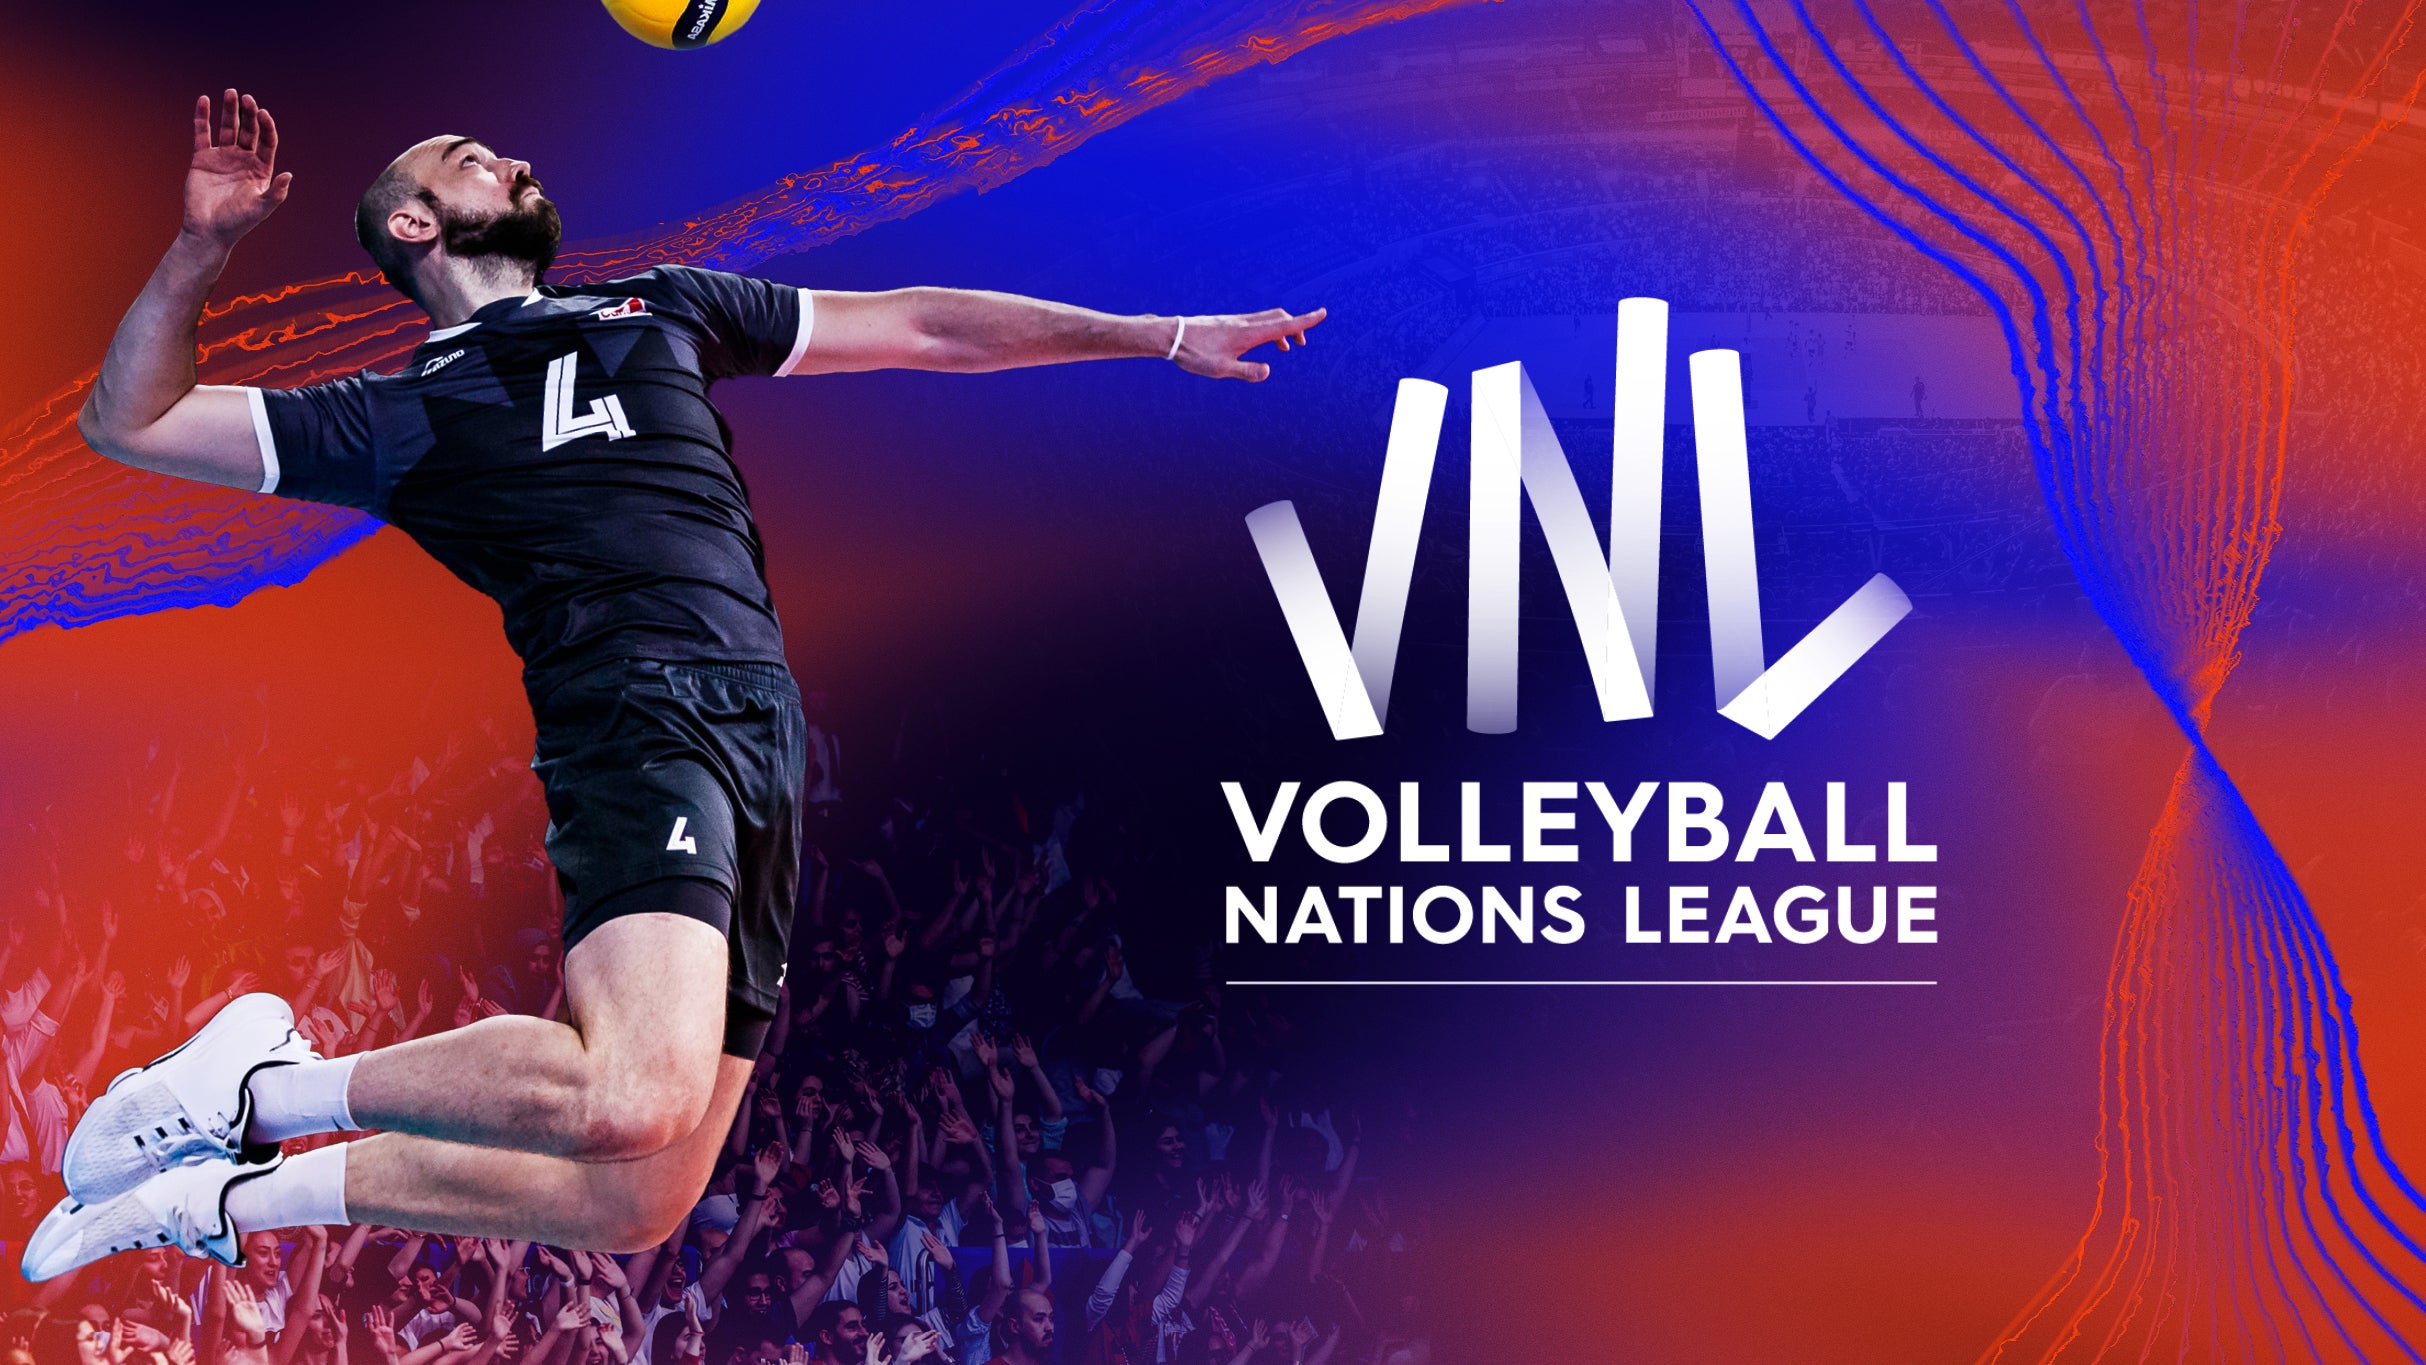 Volleyball Nations League - June 9 in Ottawa promo photo for Volleyball Canada presale offer code